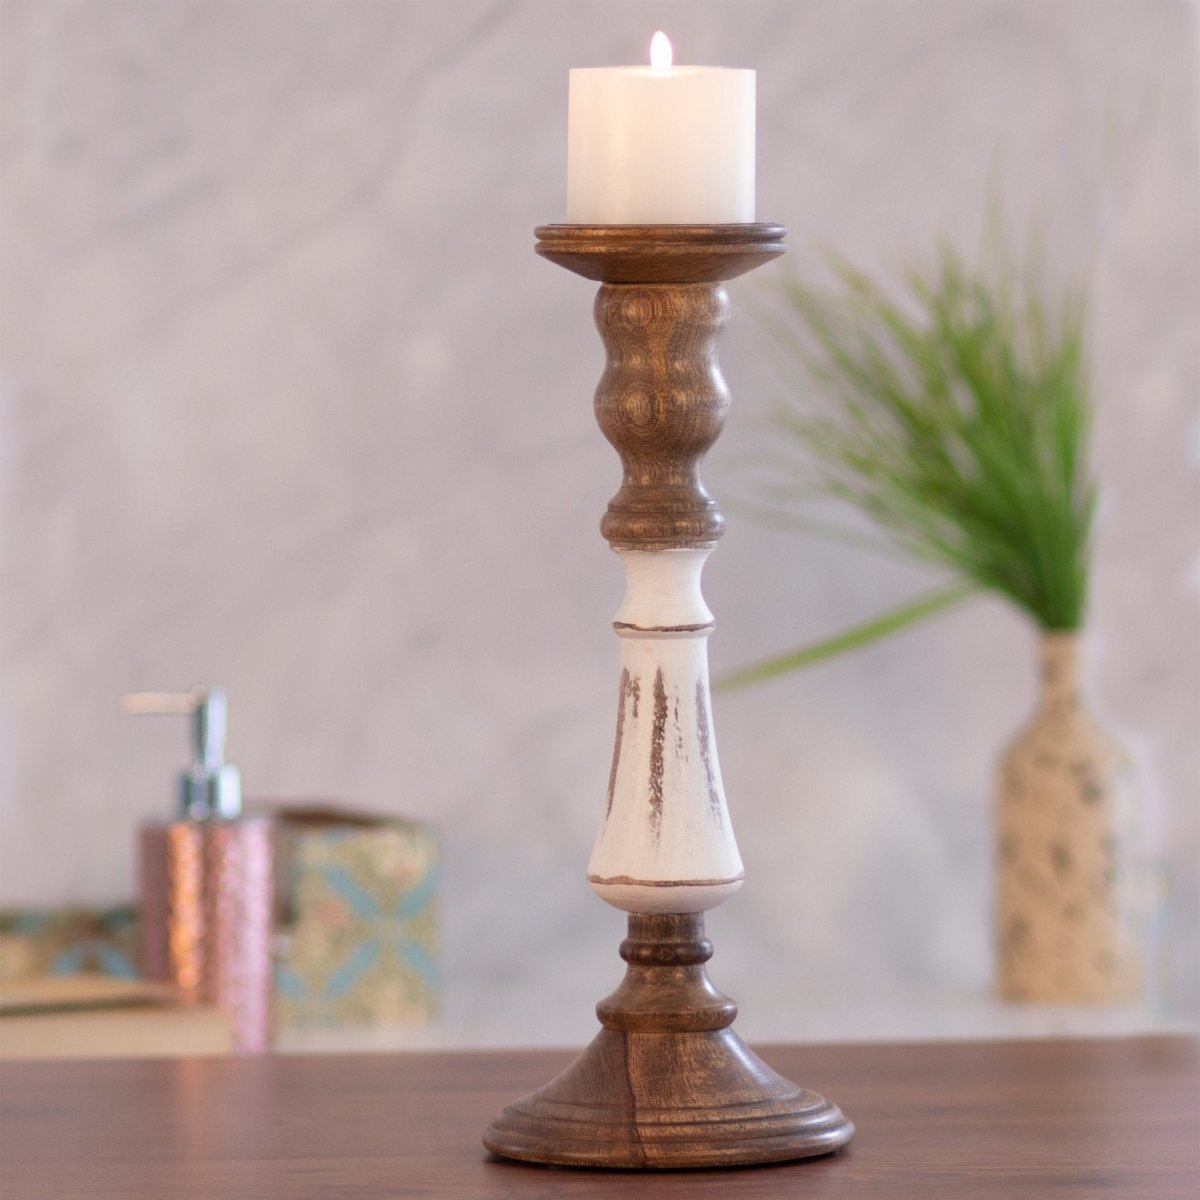 Kezevel Wooden Candle Stand - Artistic Vintage White & Brown Mango Wood  Candle Holders for Home Decoration, Pillar Candle Holder, Size 15X15X38 CM  - Kezevel